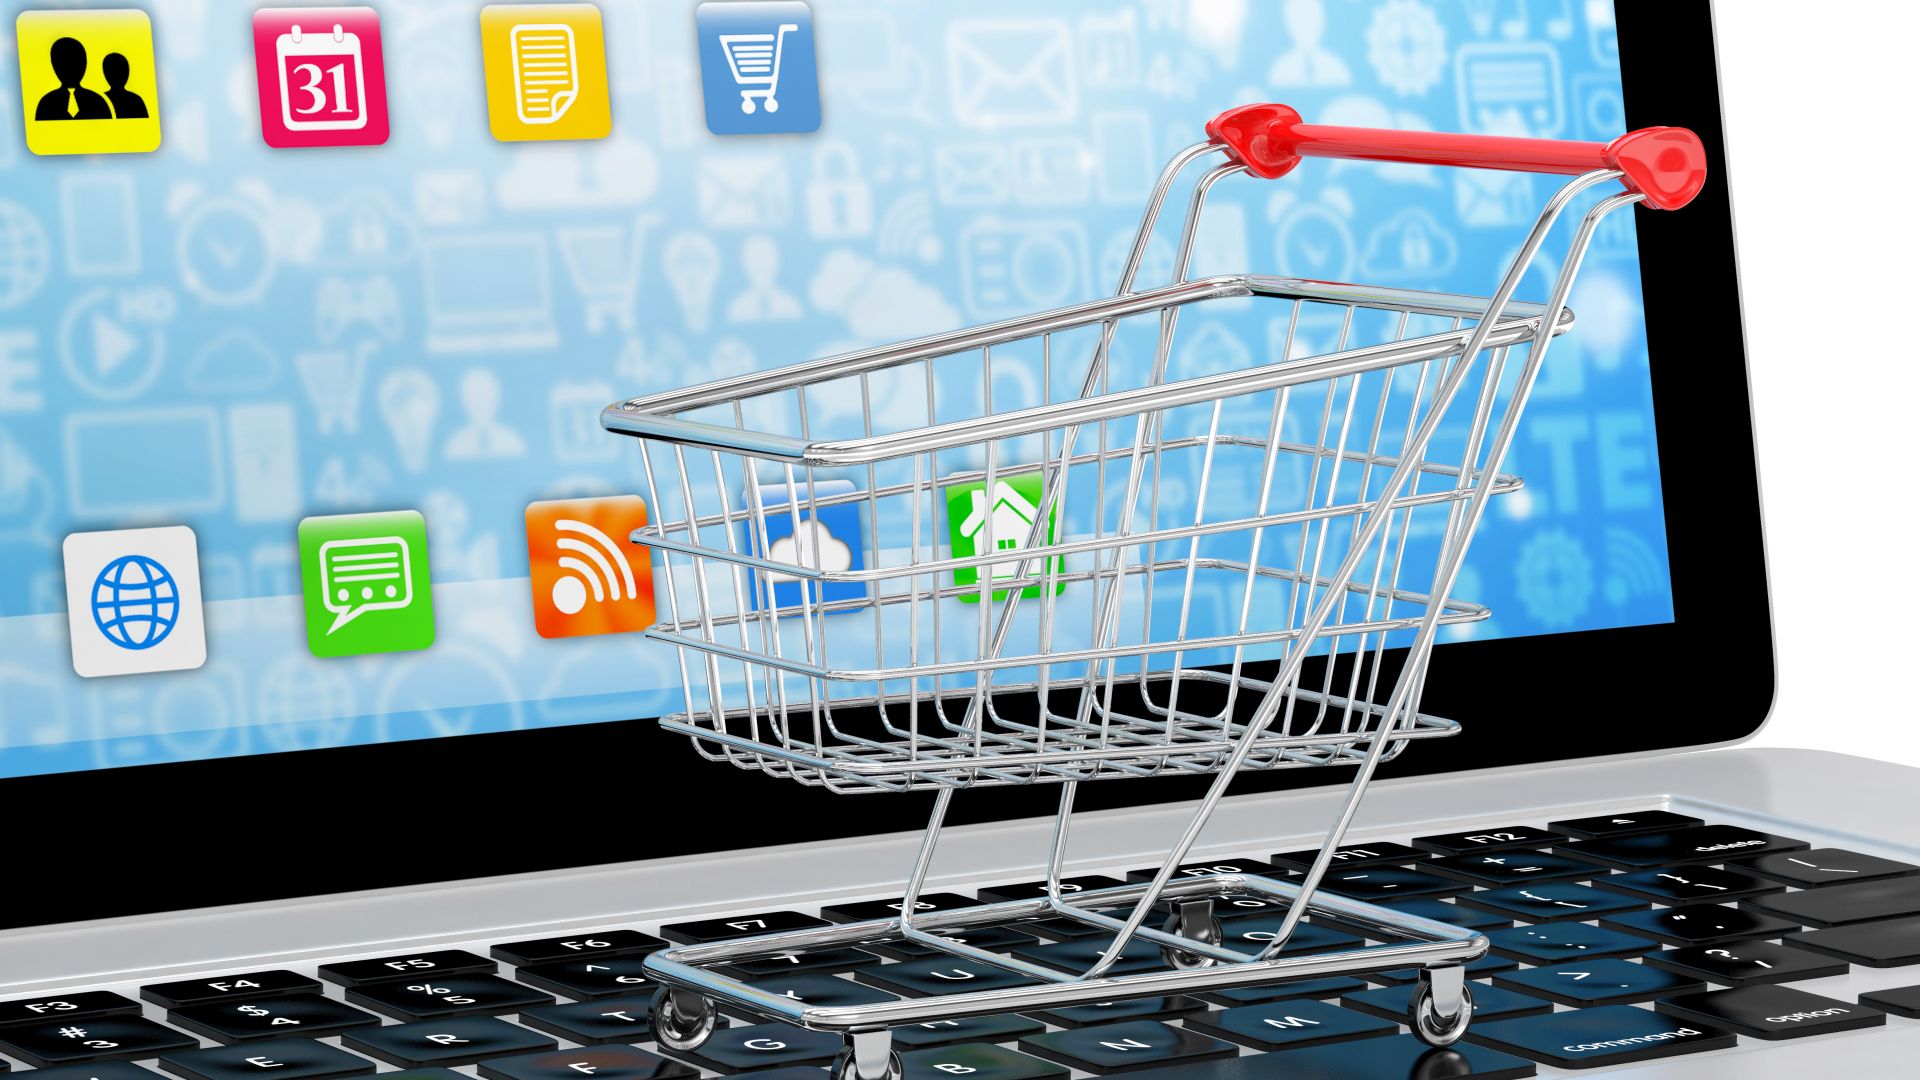 Online shopping - laptop and shopping trolley